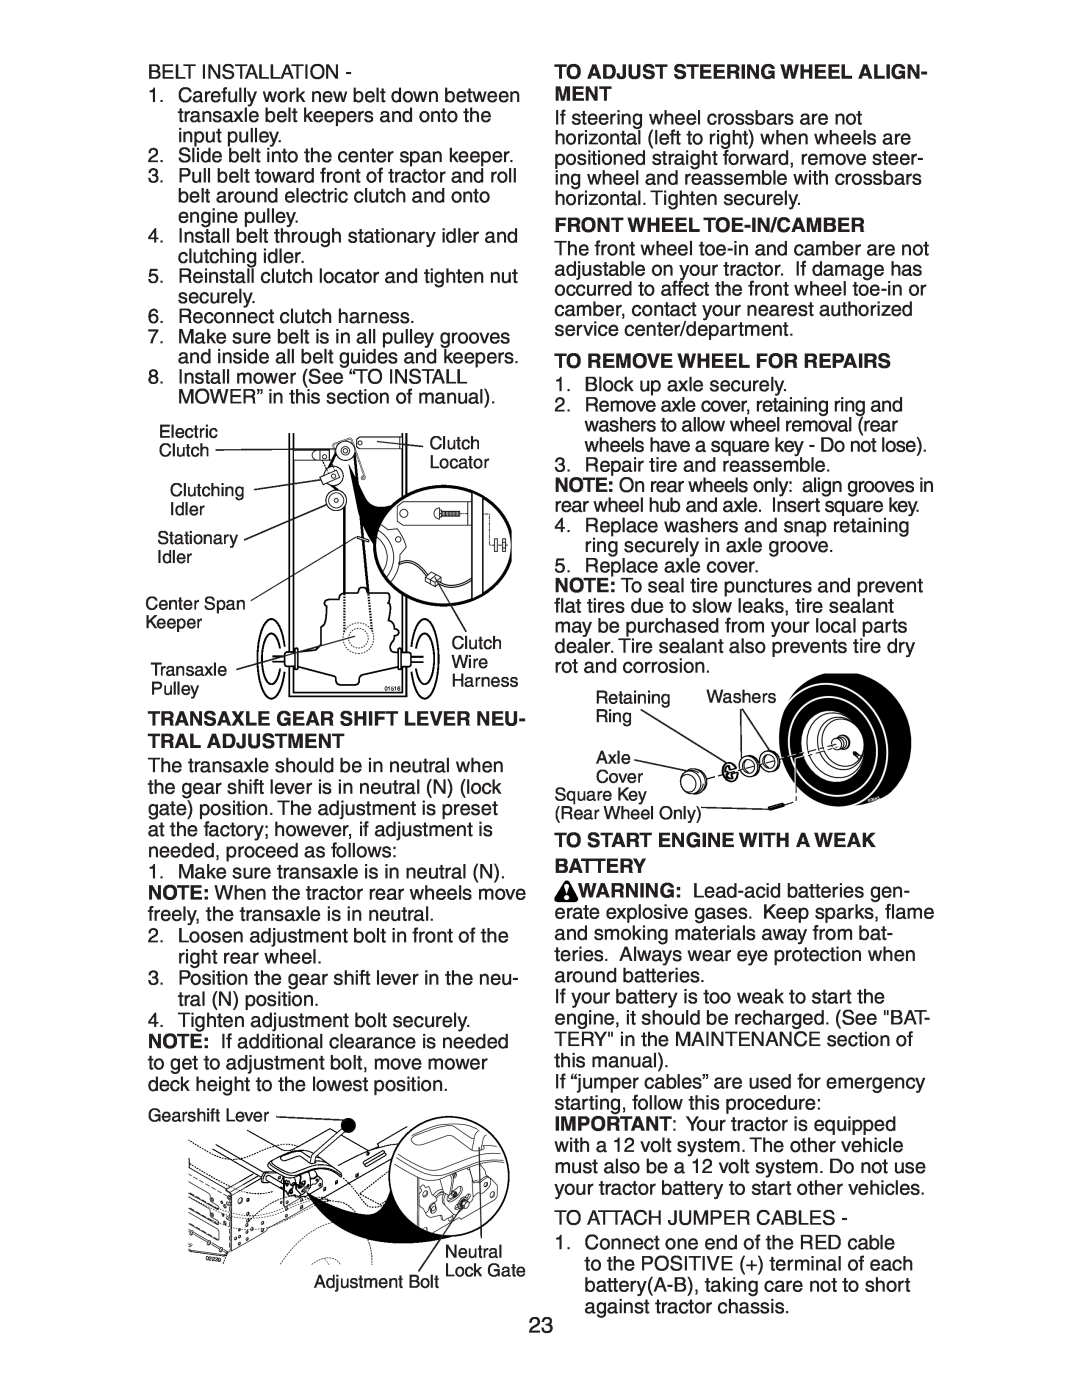 Poulan CO18542STB manual To Adjust Steering Wheel Align- Ment, Front Wheel Toe-In/Camber, To Remove Wheel For Repairs 